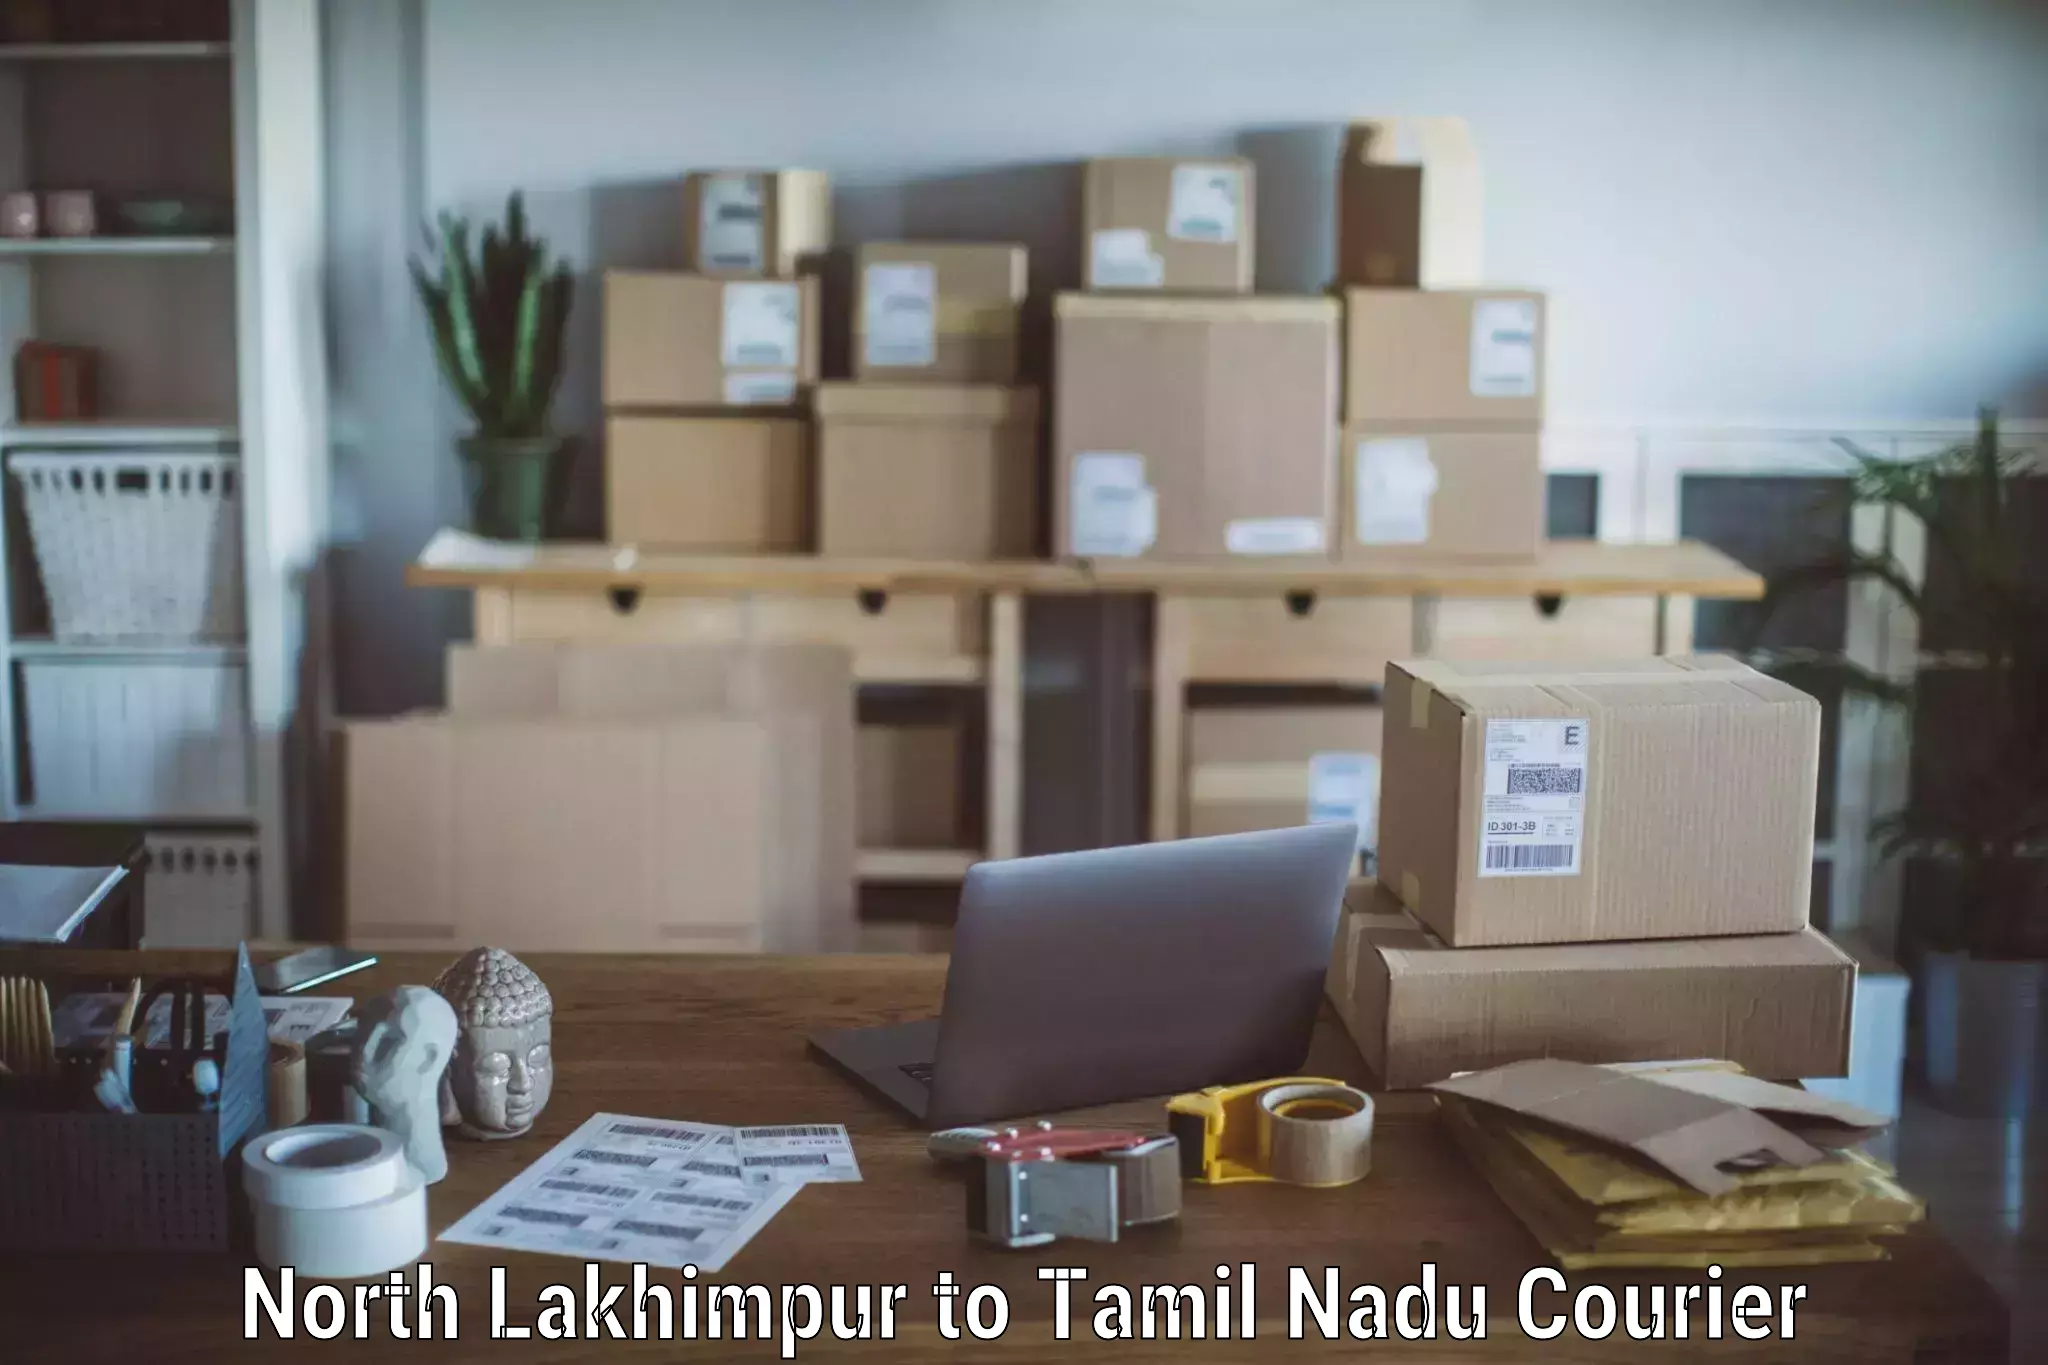 High-quality moving services in North Lakhimpur to Thiruvadanai